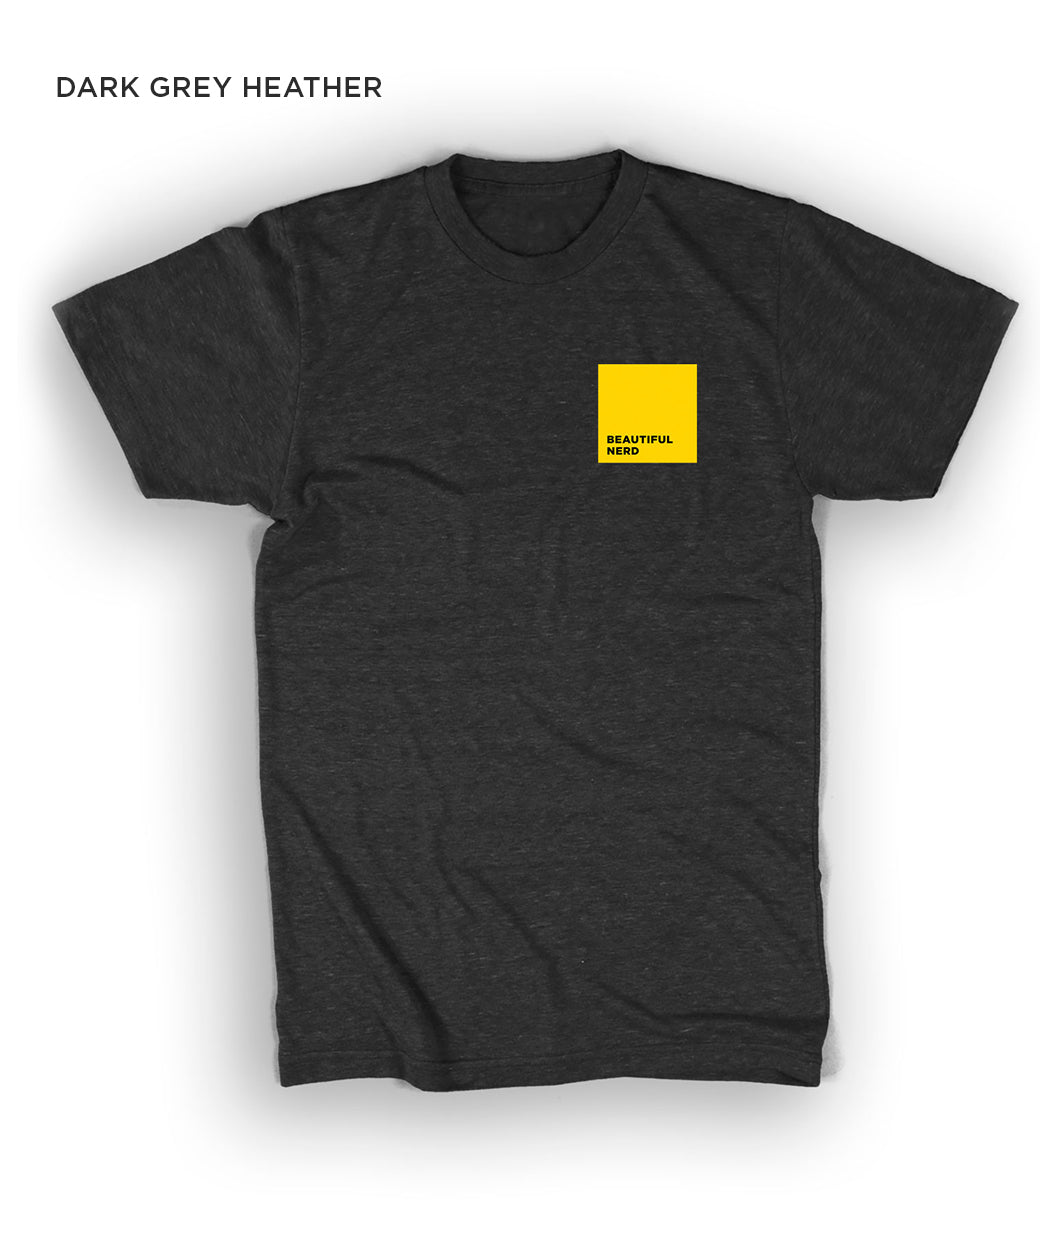 A grey short-sleeved t-shirt with a yellow square on the upper right side of the chest - by 99% Invisible